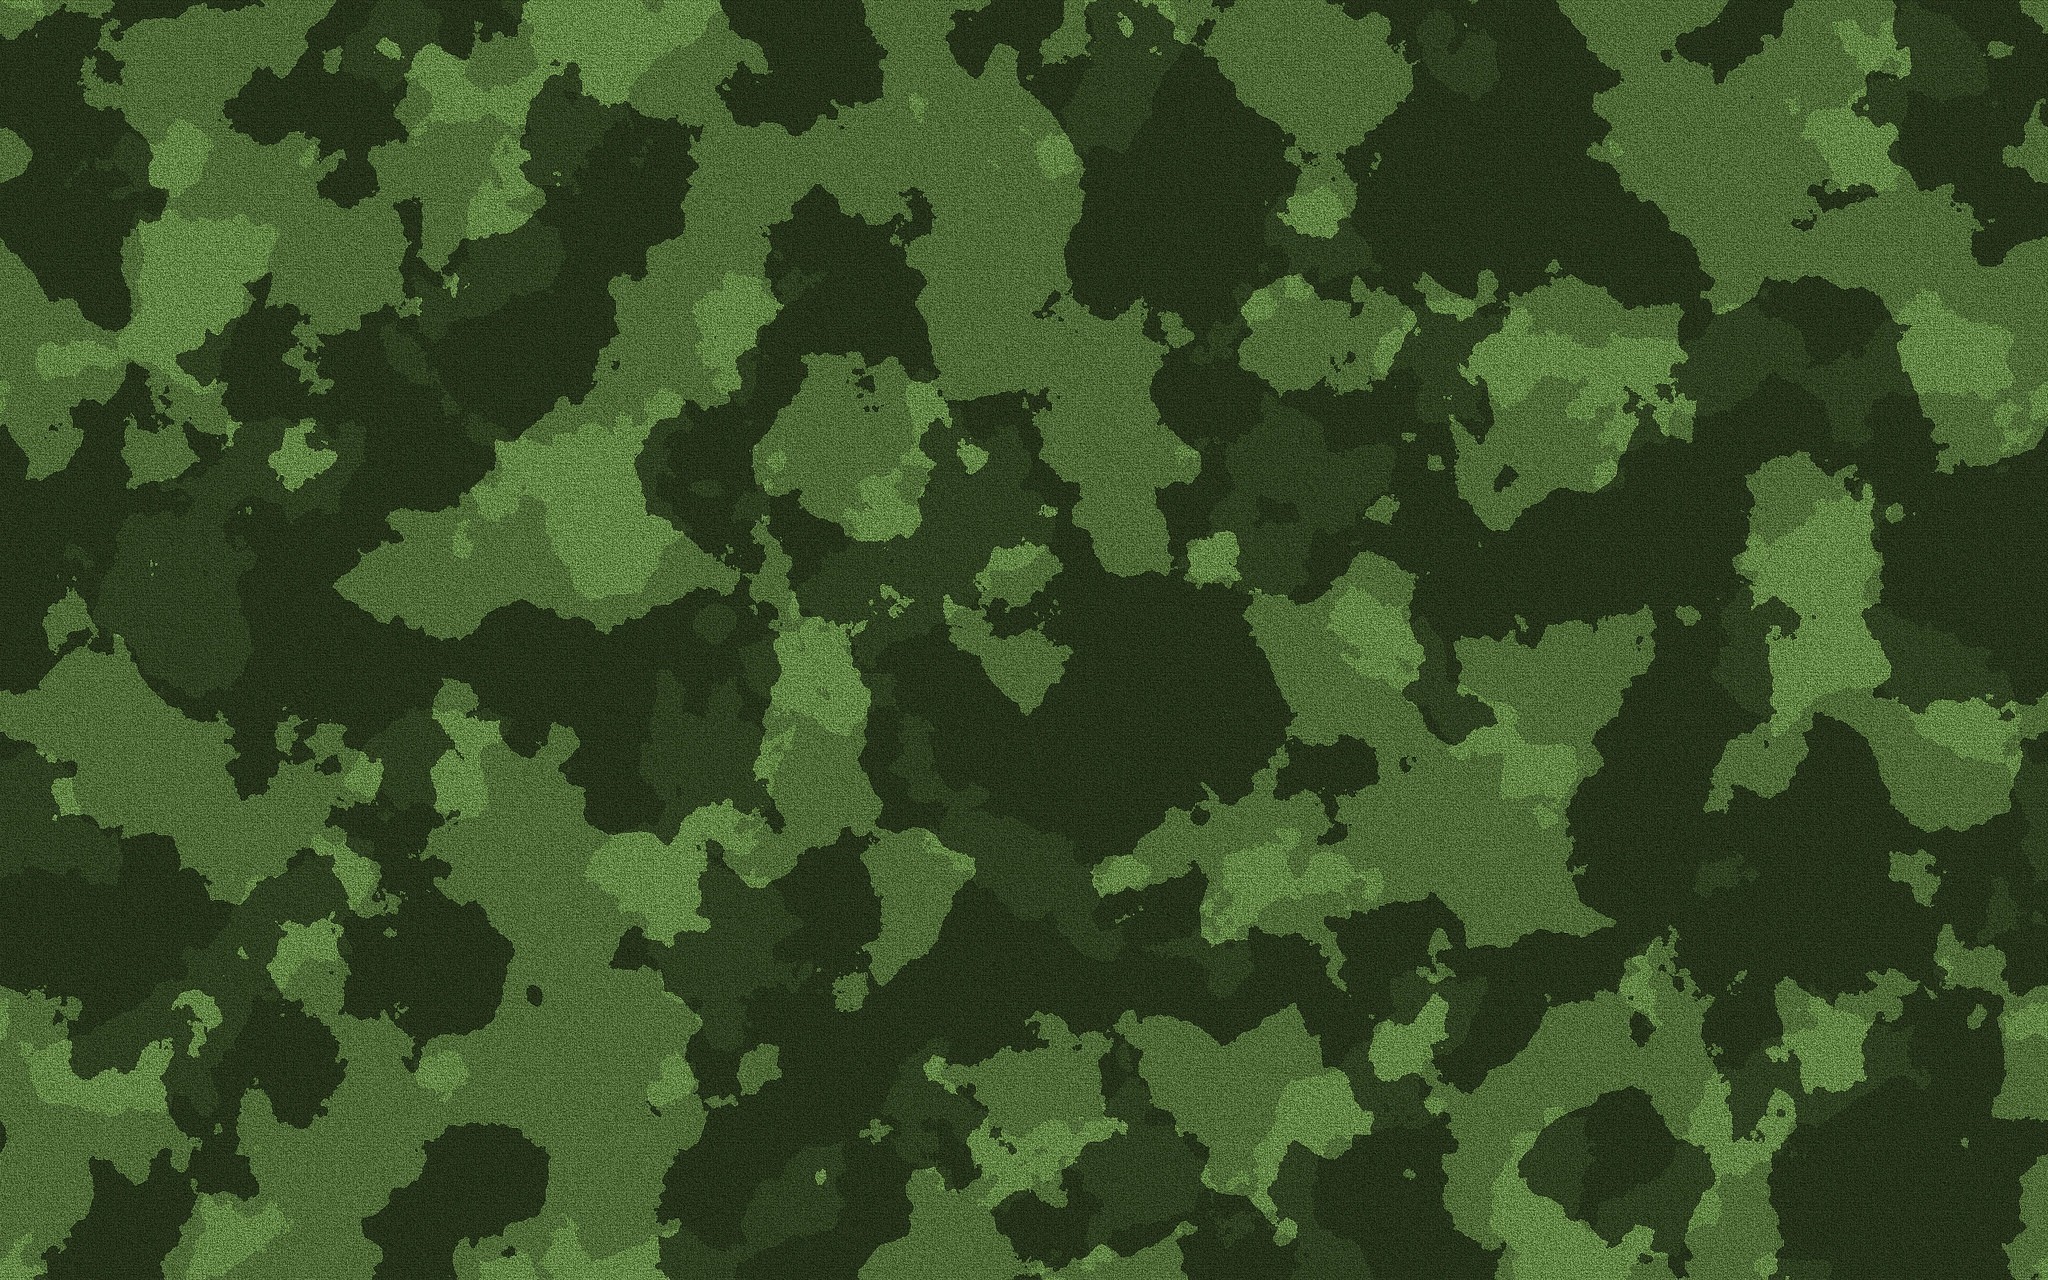 2048x1280 Camouflage Green Army Texture. Download Full Size File